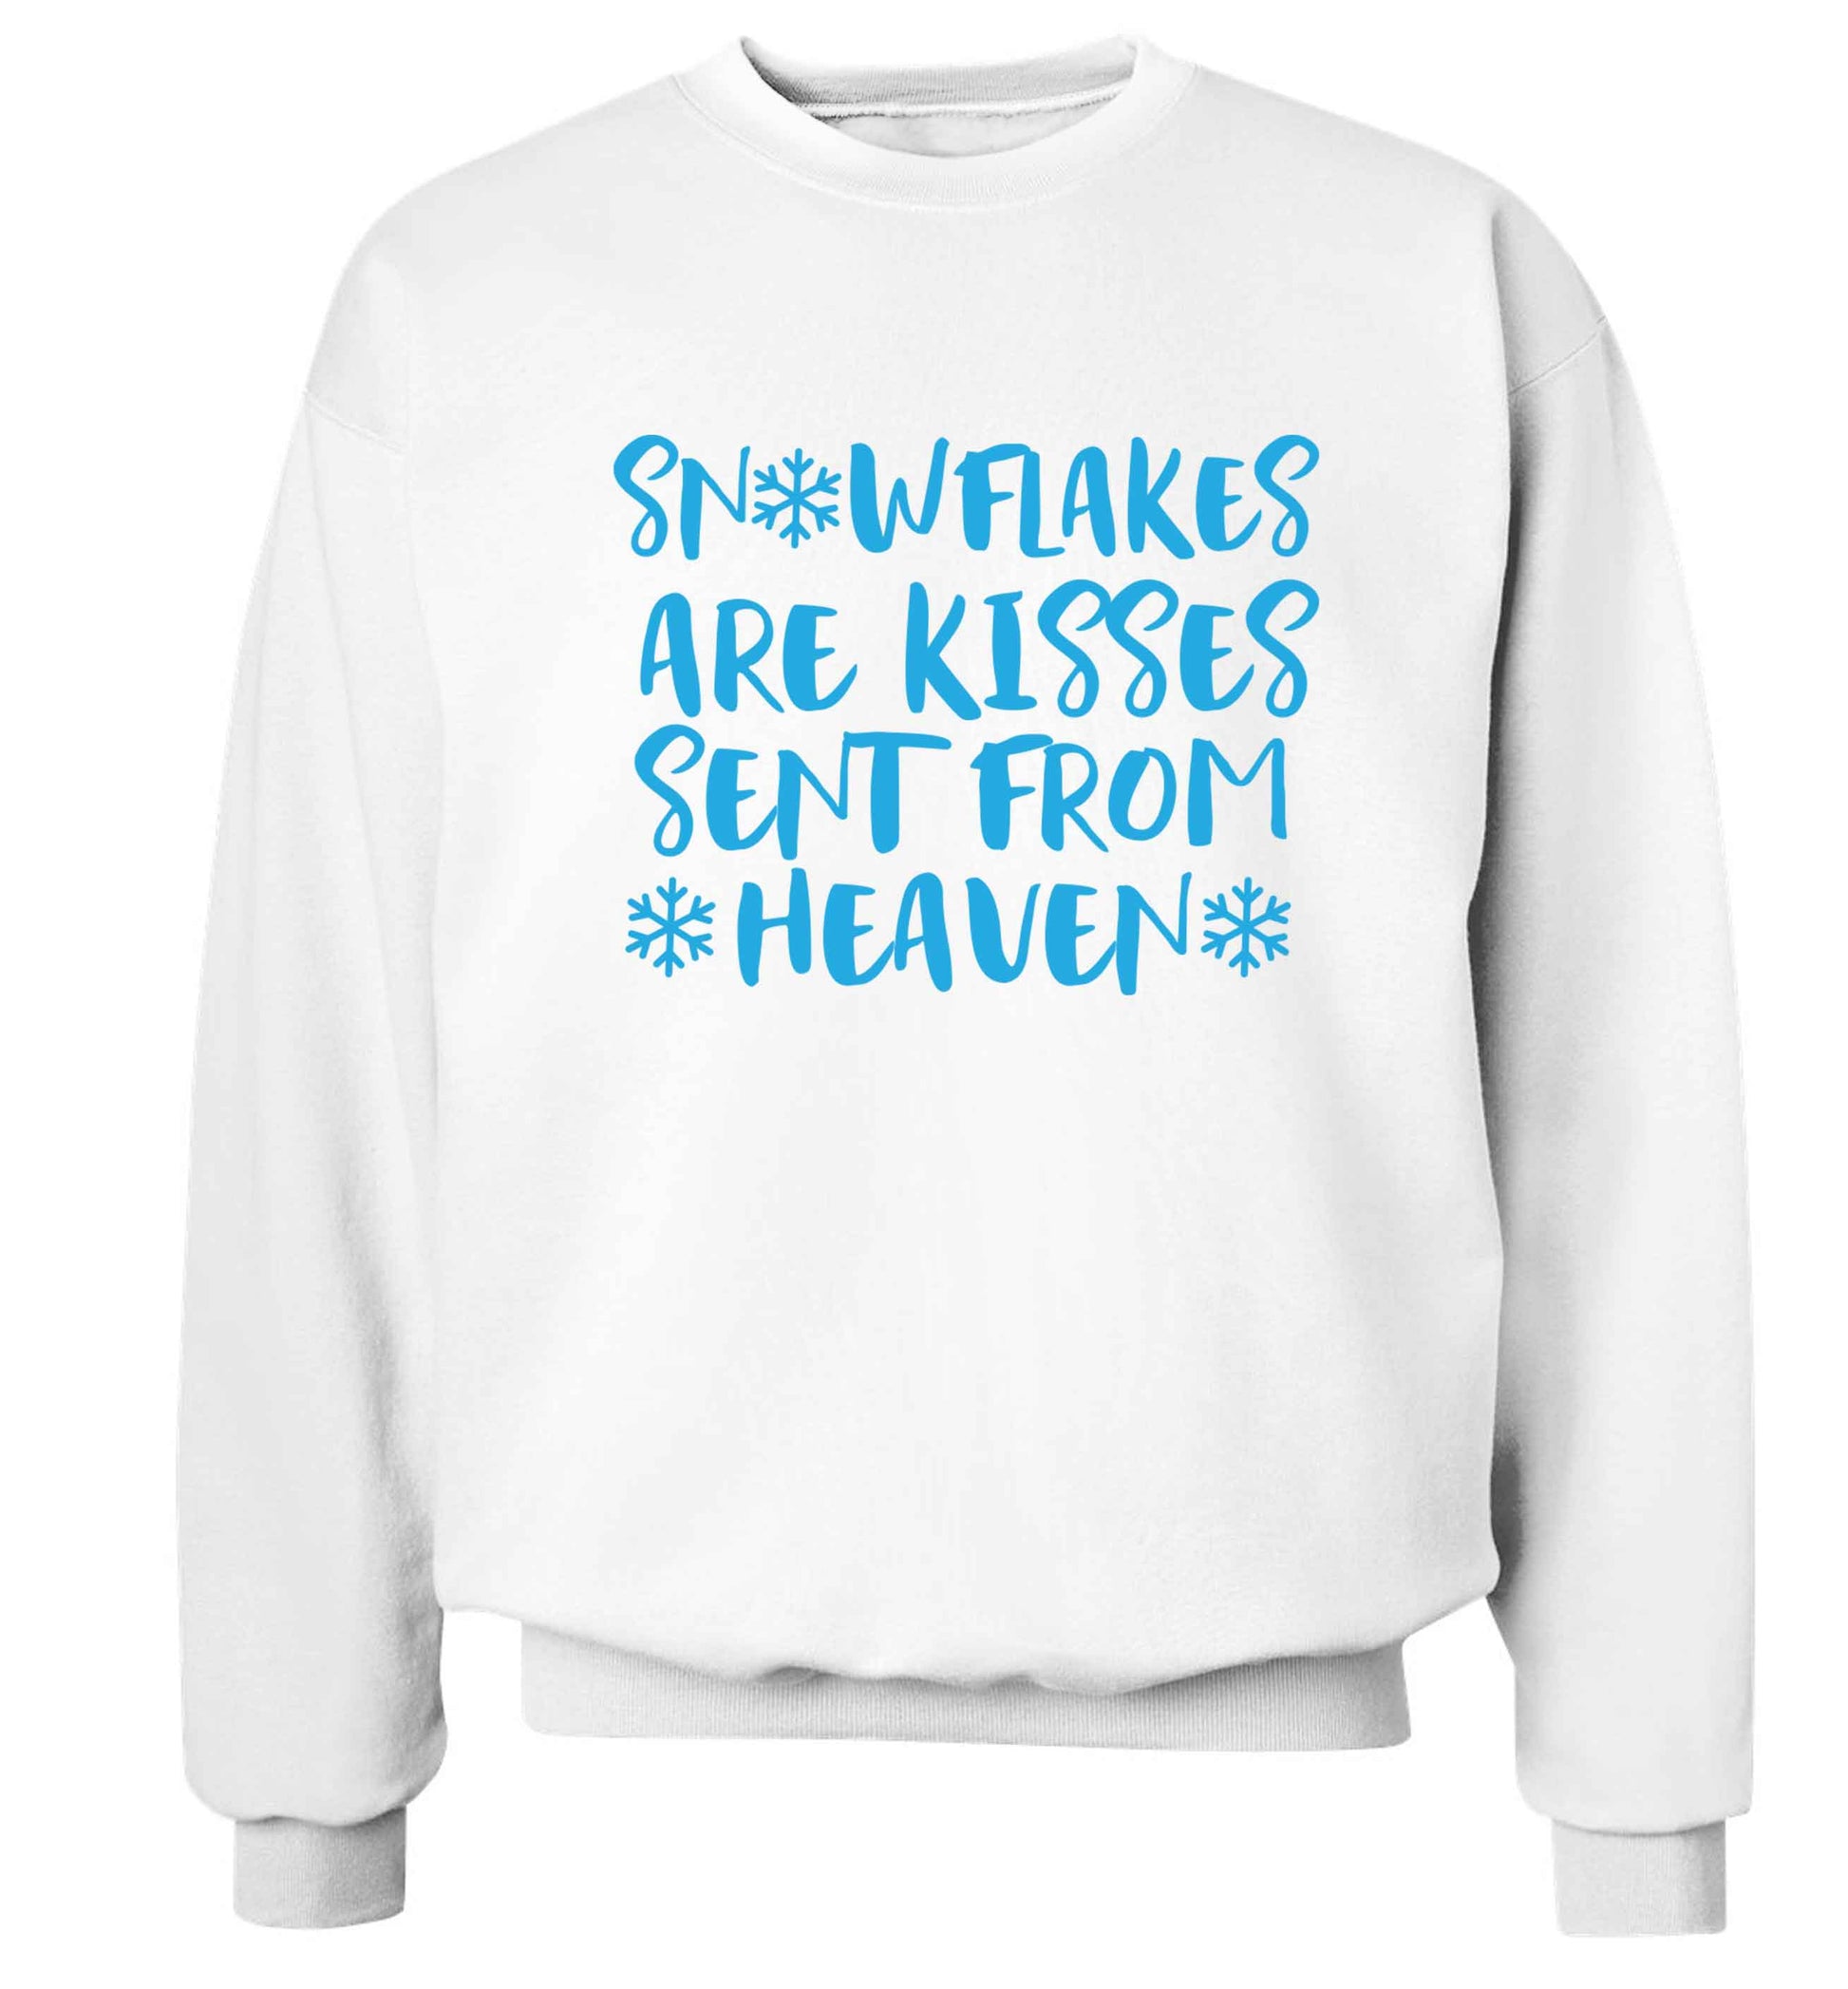 Snowflakes are kisses sent from heaven Adult's unisex white Sweater 2XL